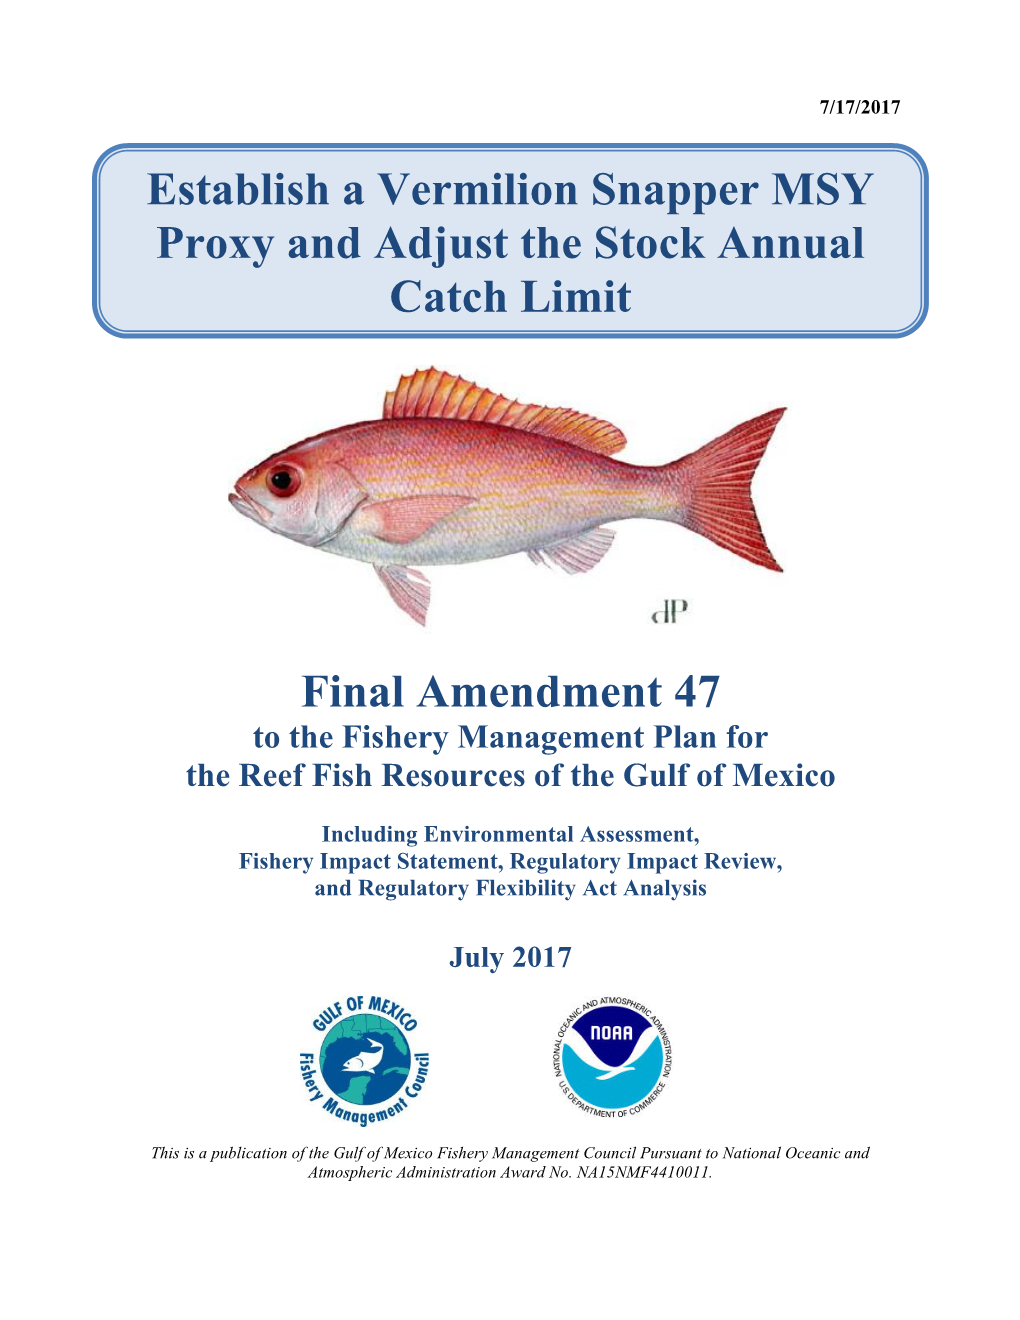 Establish a Vermilion Snapper MSY Proxy and Adjust the Stock Annual